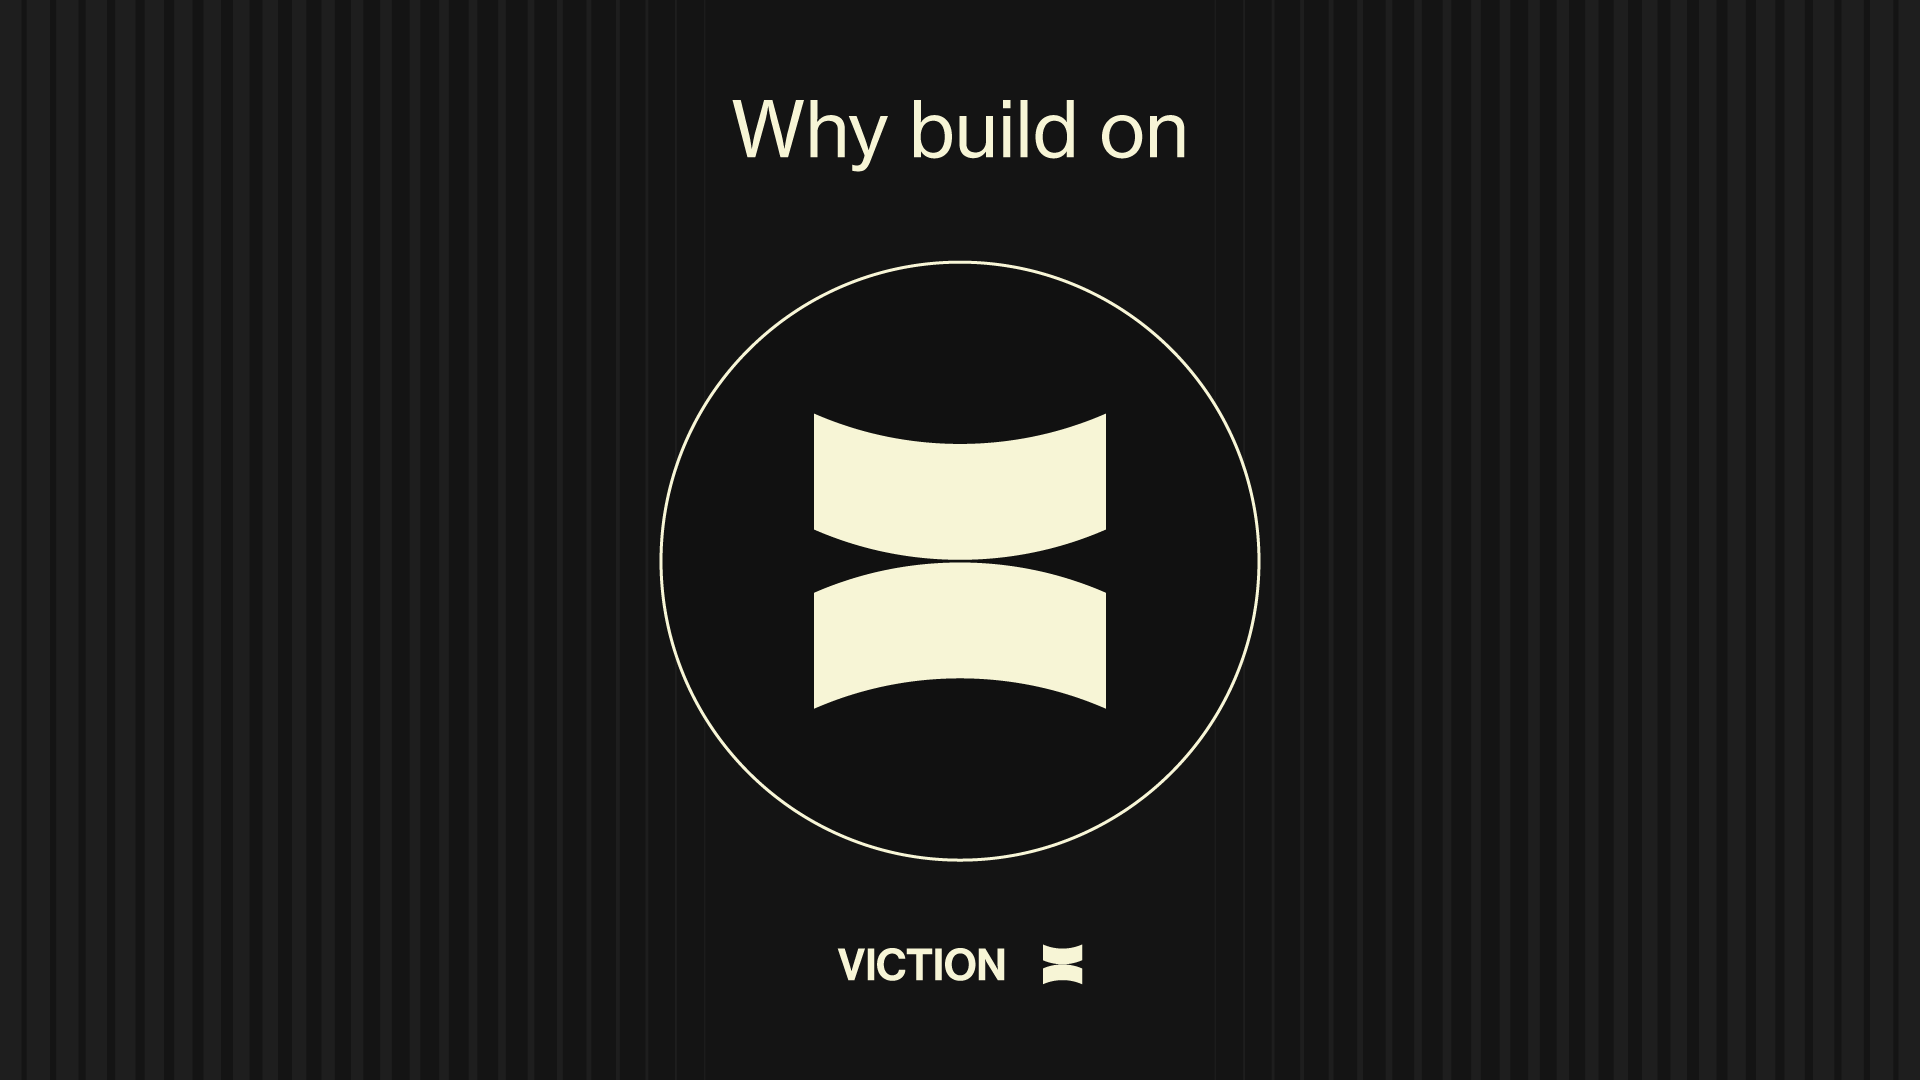 Why Viction Matters: A closer look at our potentials